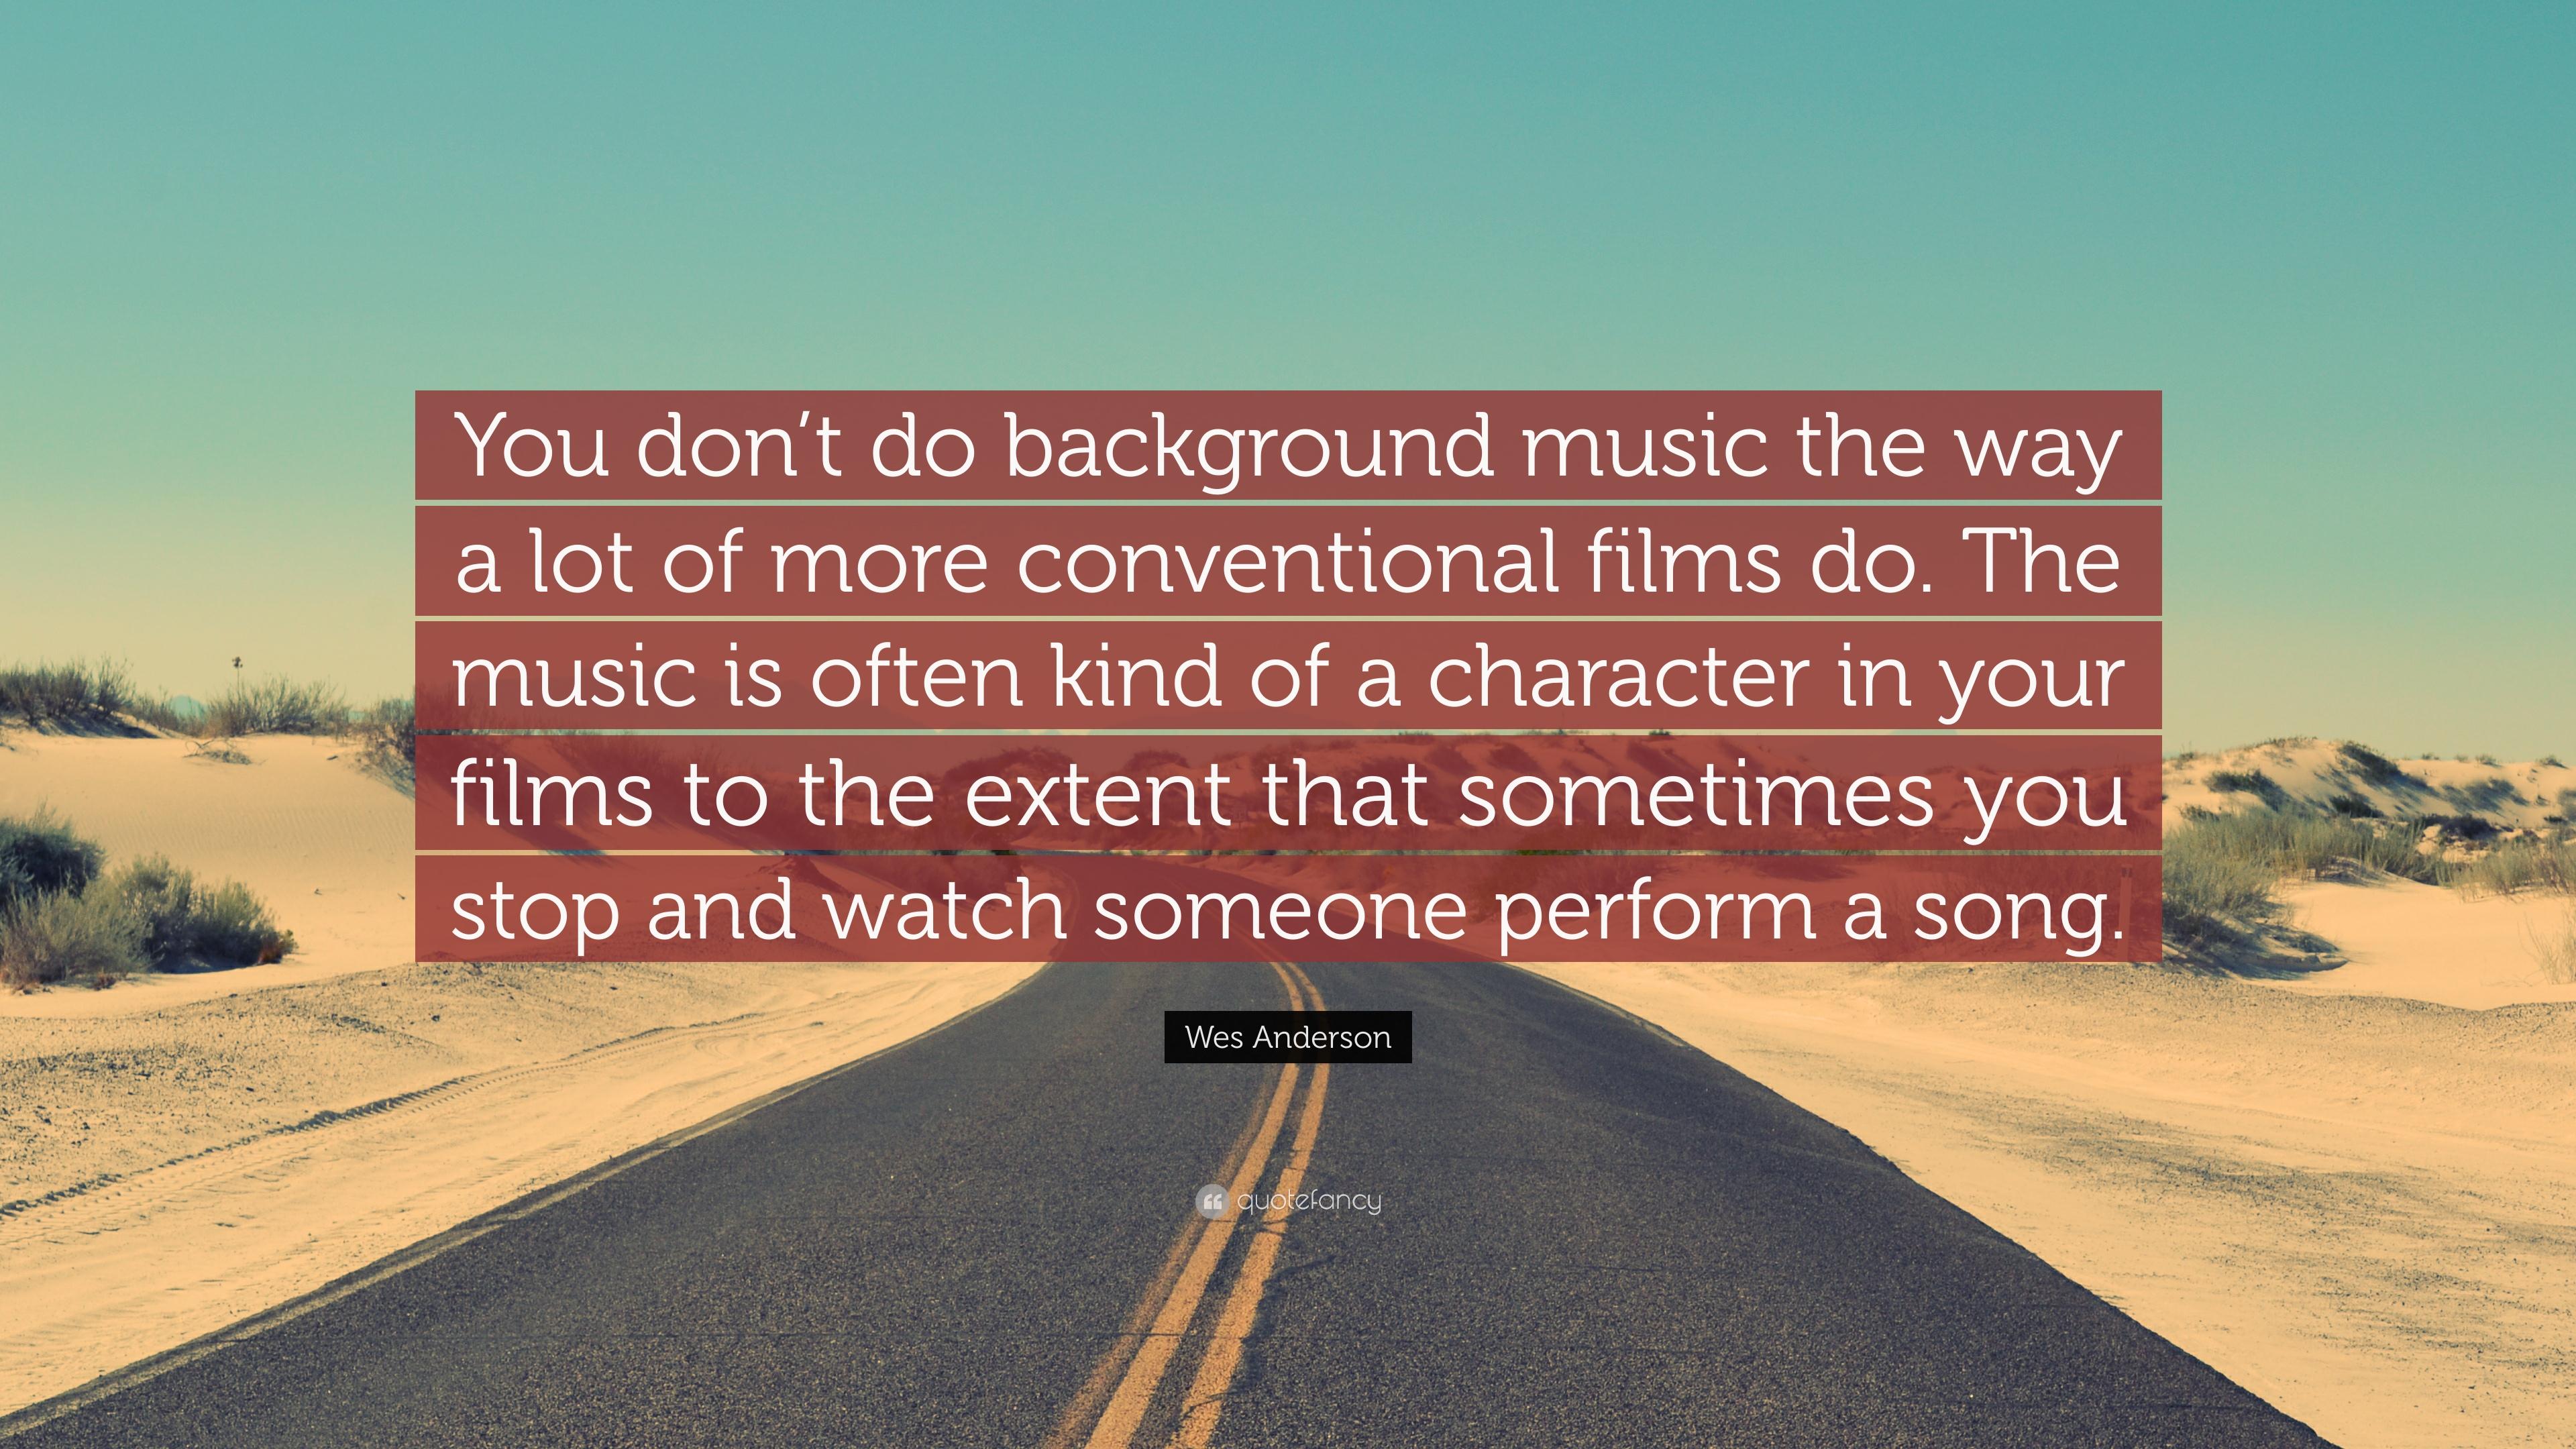 Wes Anderson Quote: “You don't do background music the way a lot